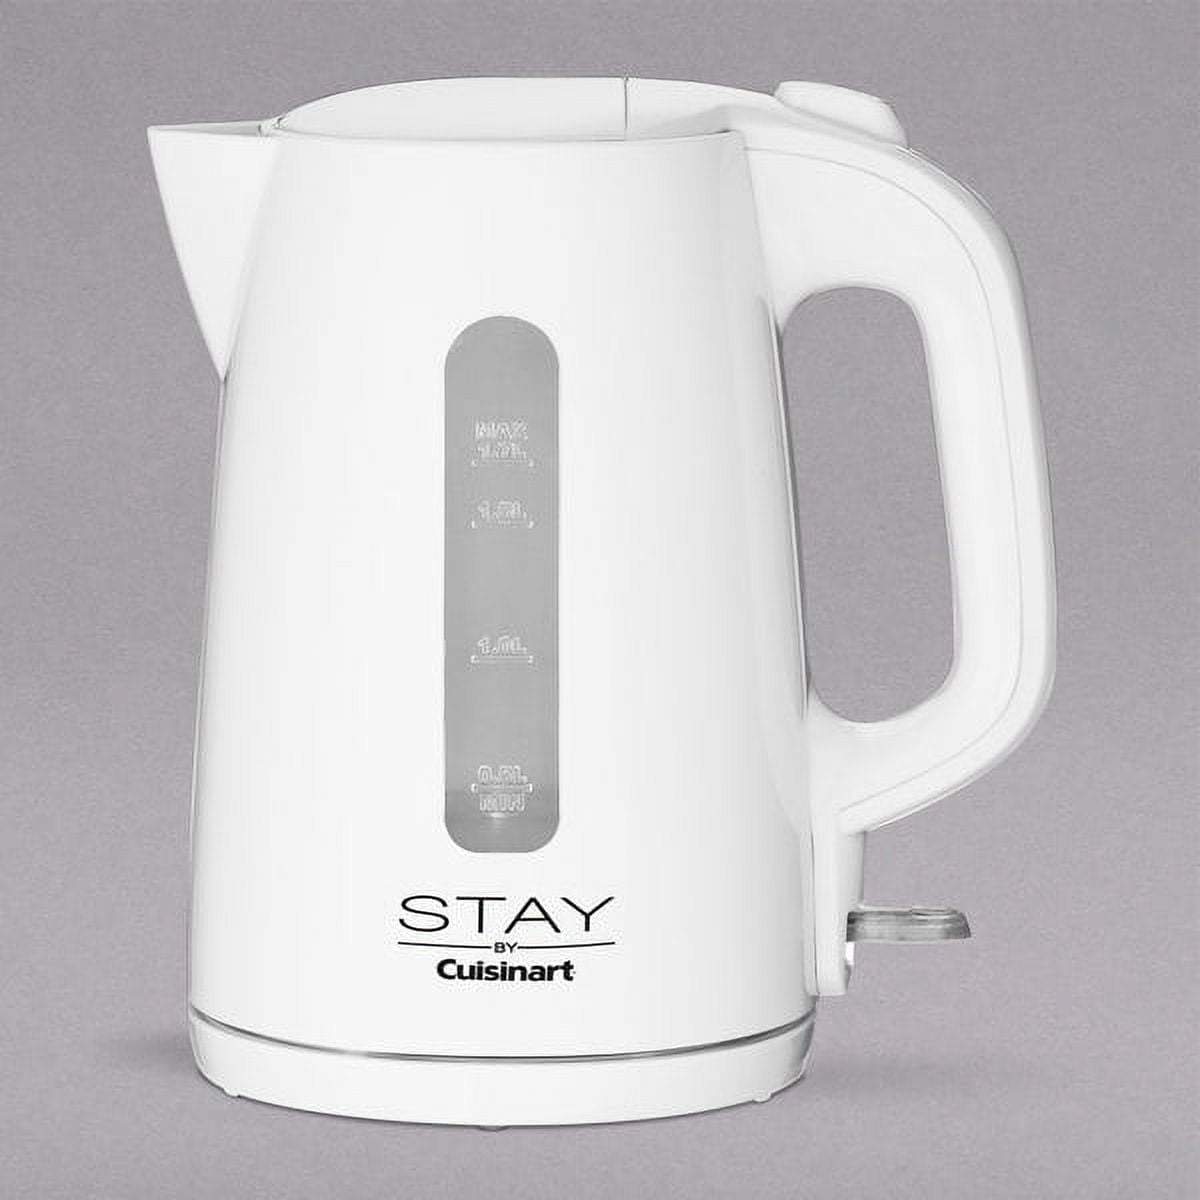 Cuisinart QuicKettle Electric 0.5 Liter Tea Kettle with Stay Cool Handle,  White, 1 Piece - Ralphs